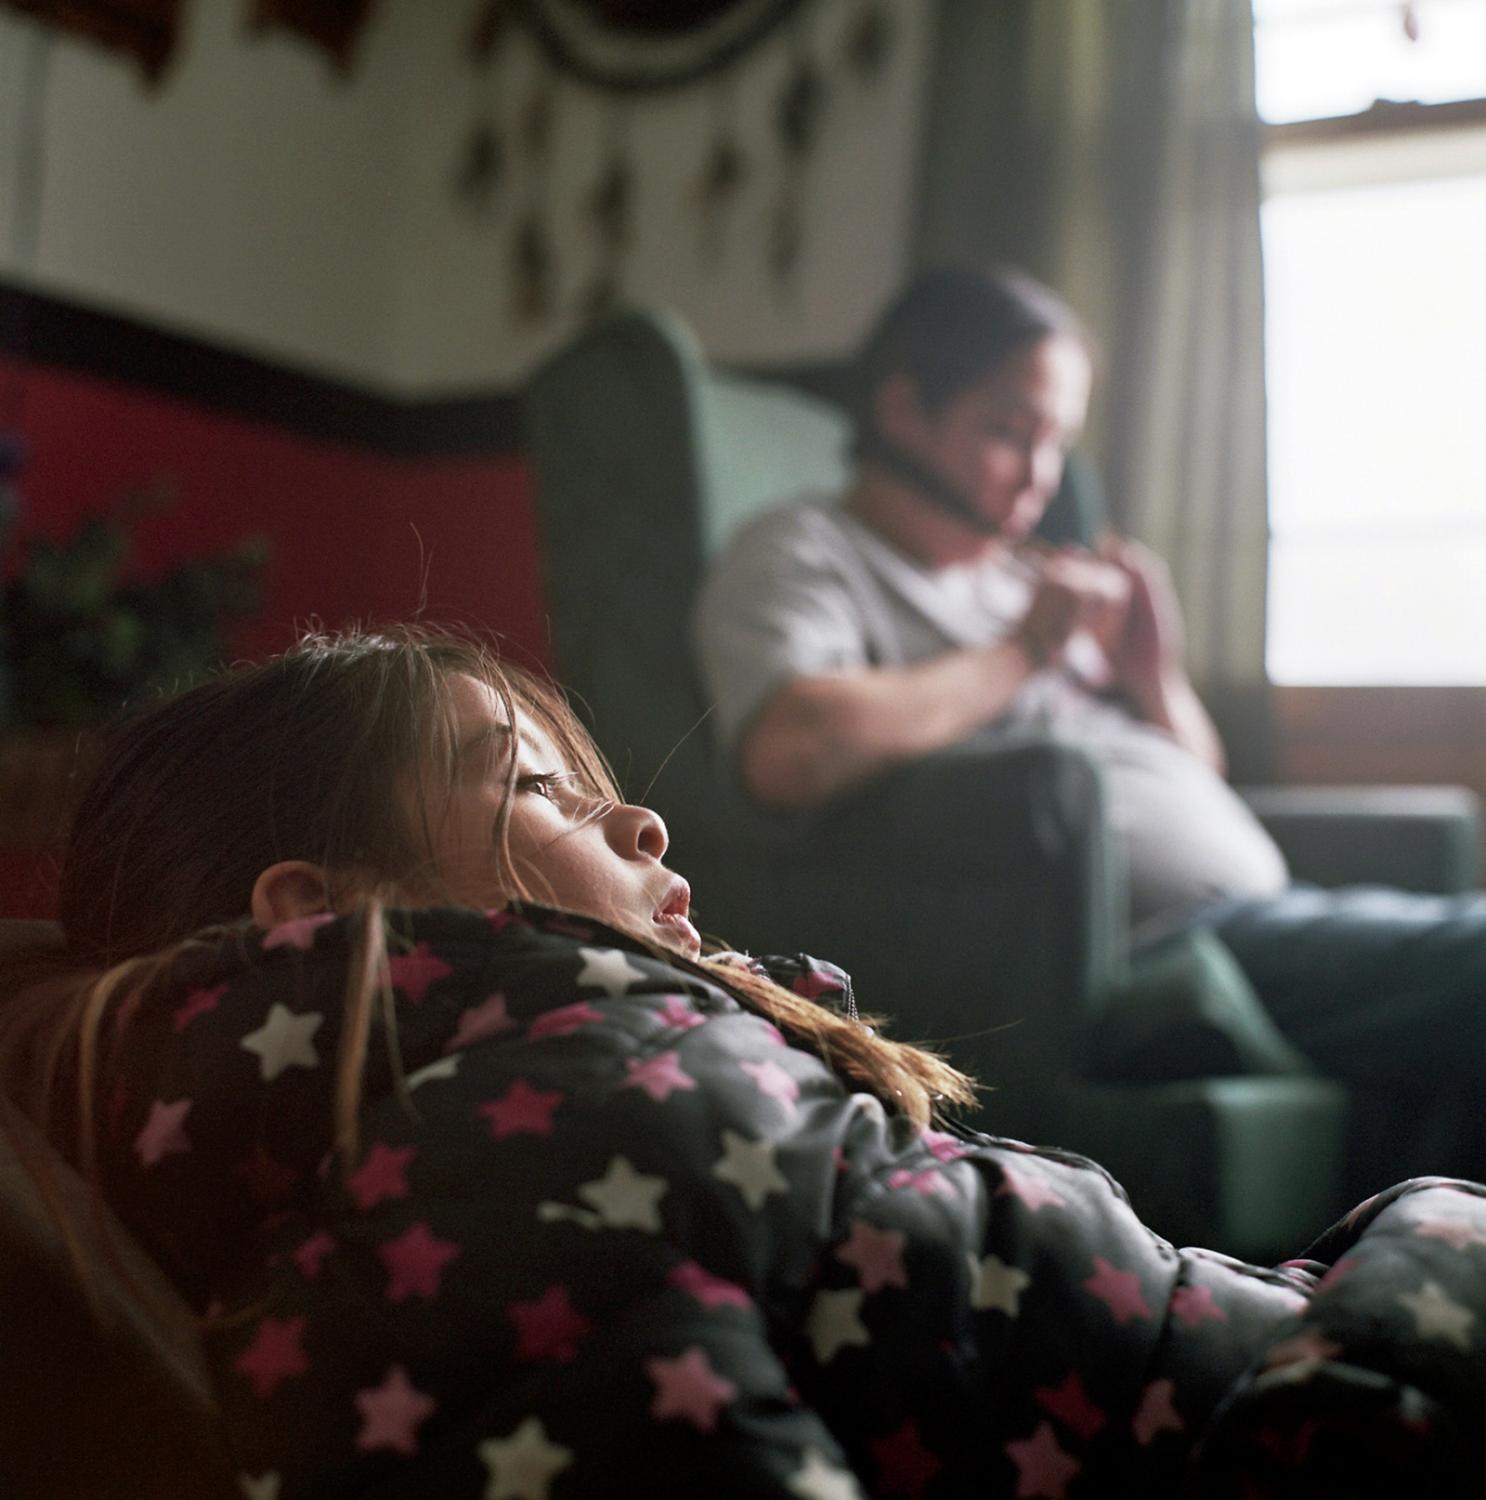 Spirit Lake - Taylor Anderson, age 8, watching TV with her mother Casey...